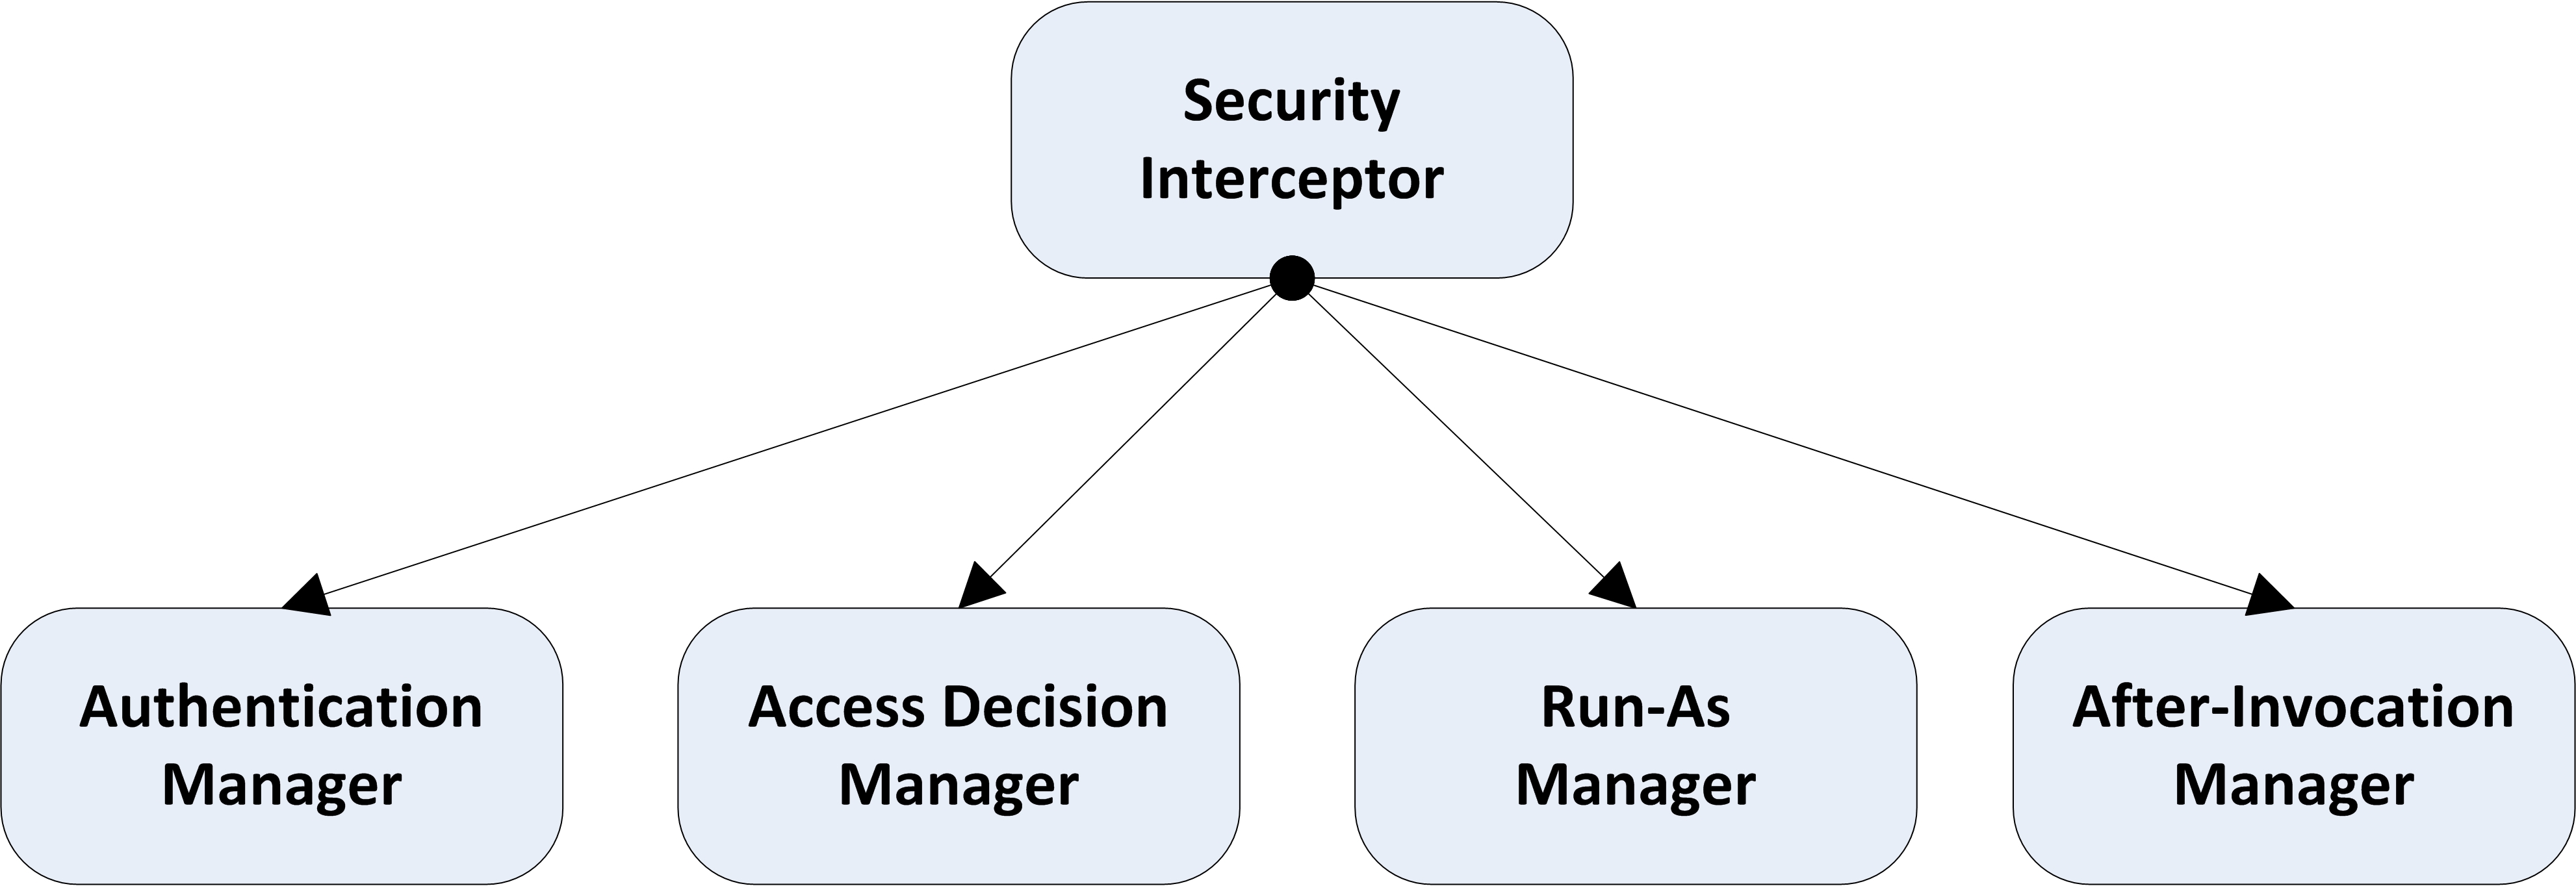 Figure 15-1. Security Interceptor and its associated managers